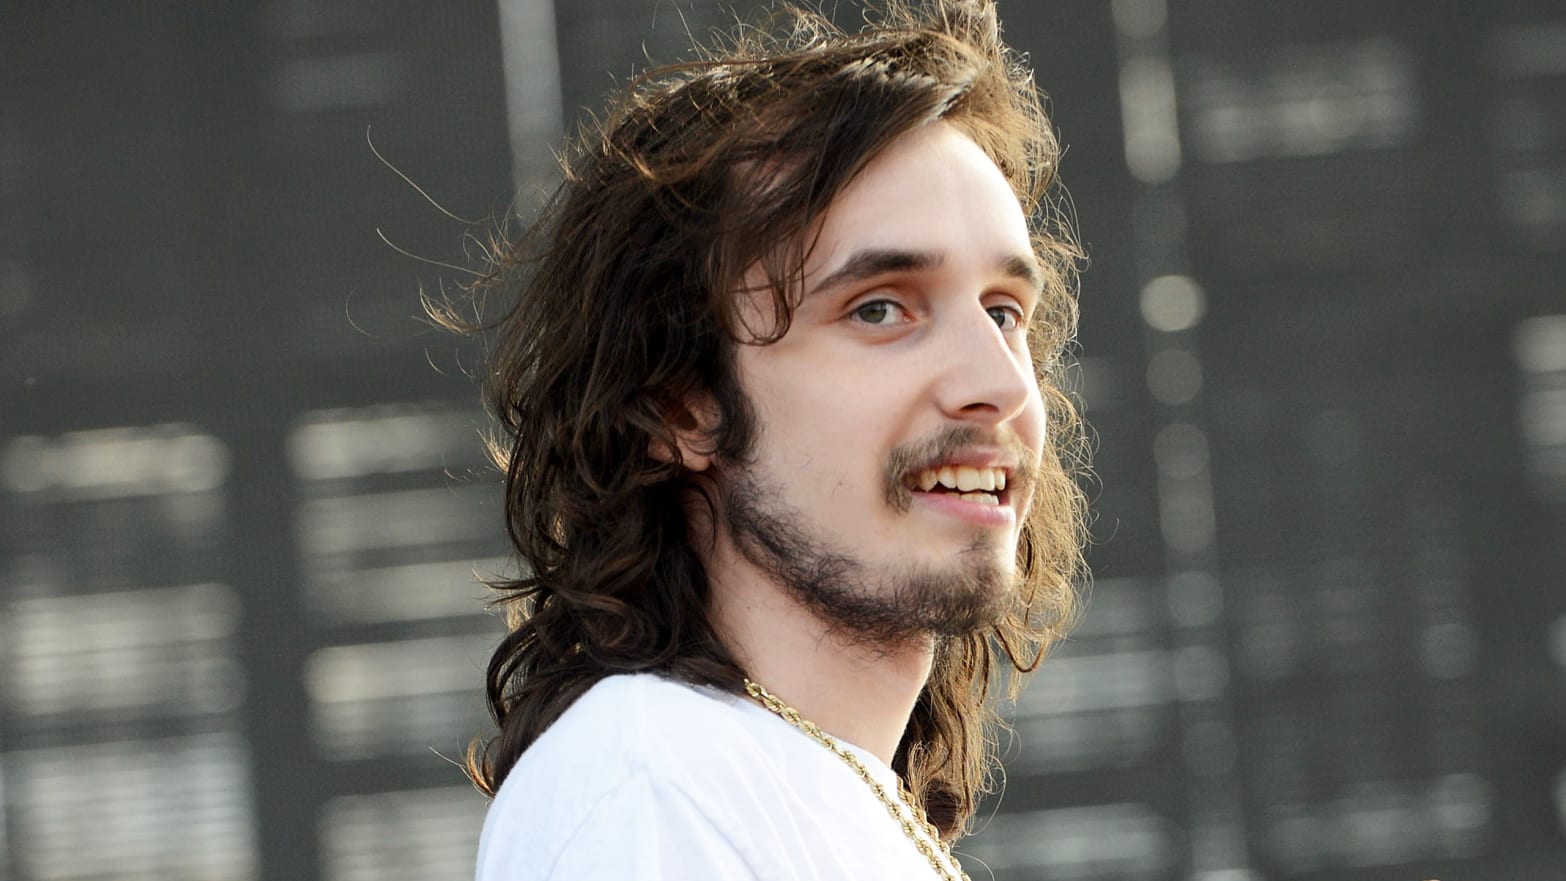 Soundcloud Rapper Kevin Pouya Accused Of Orchestrating Gang Rape